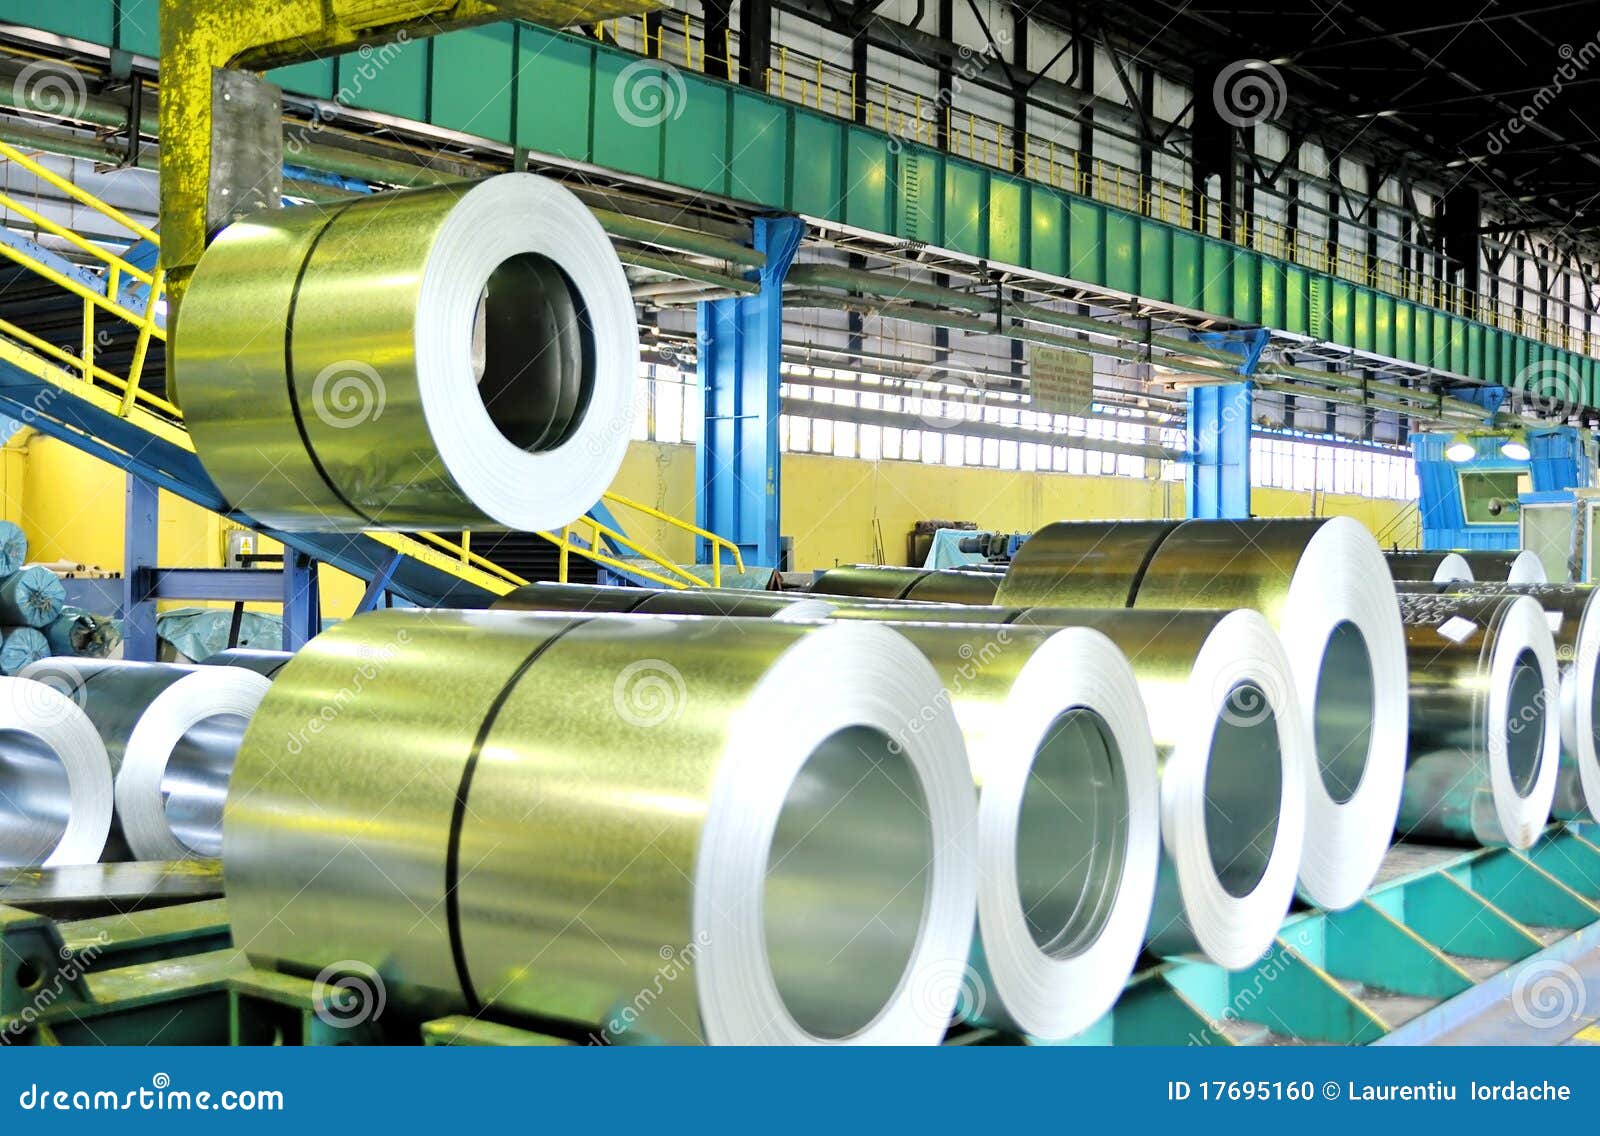 Rolls of steel sheet stock photo. Image of seamless, strong 17695160